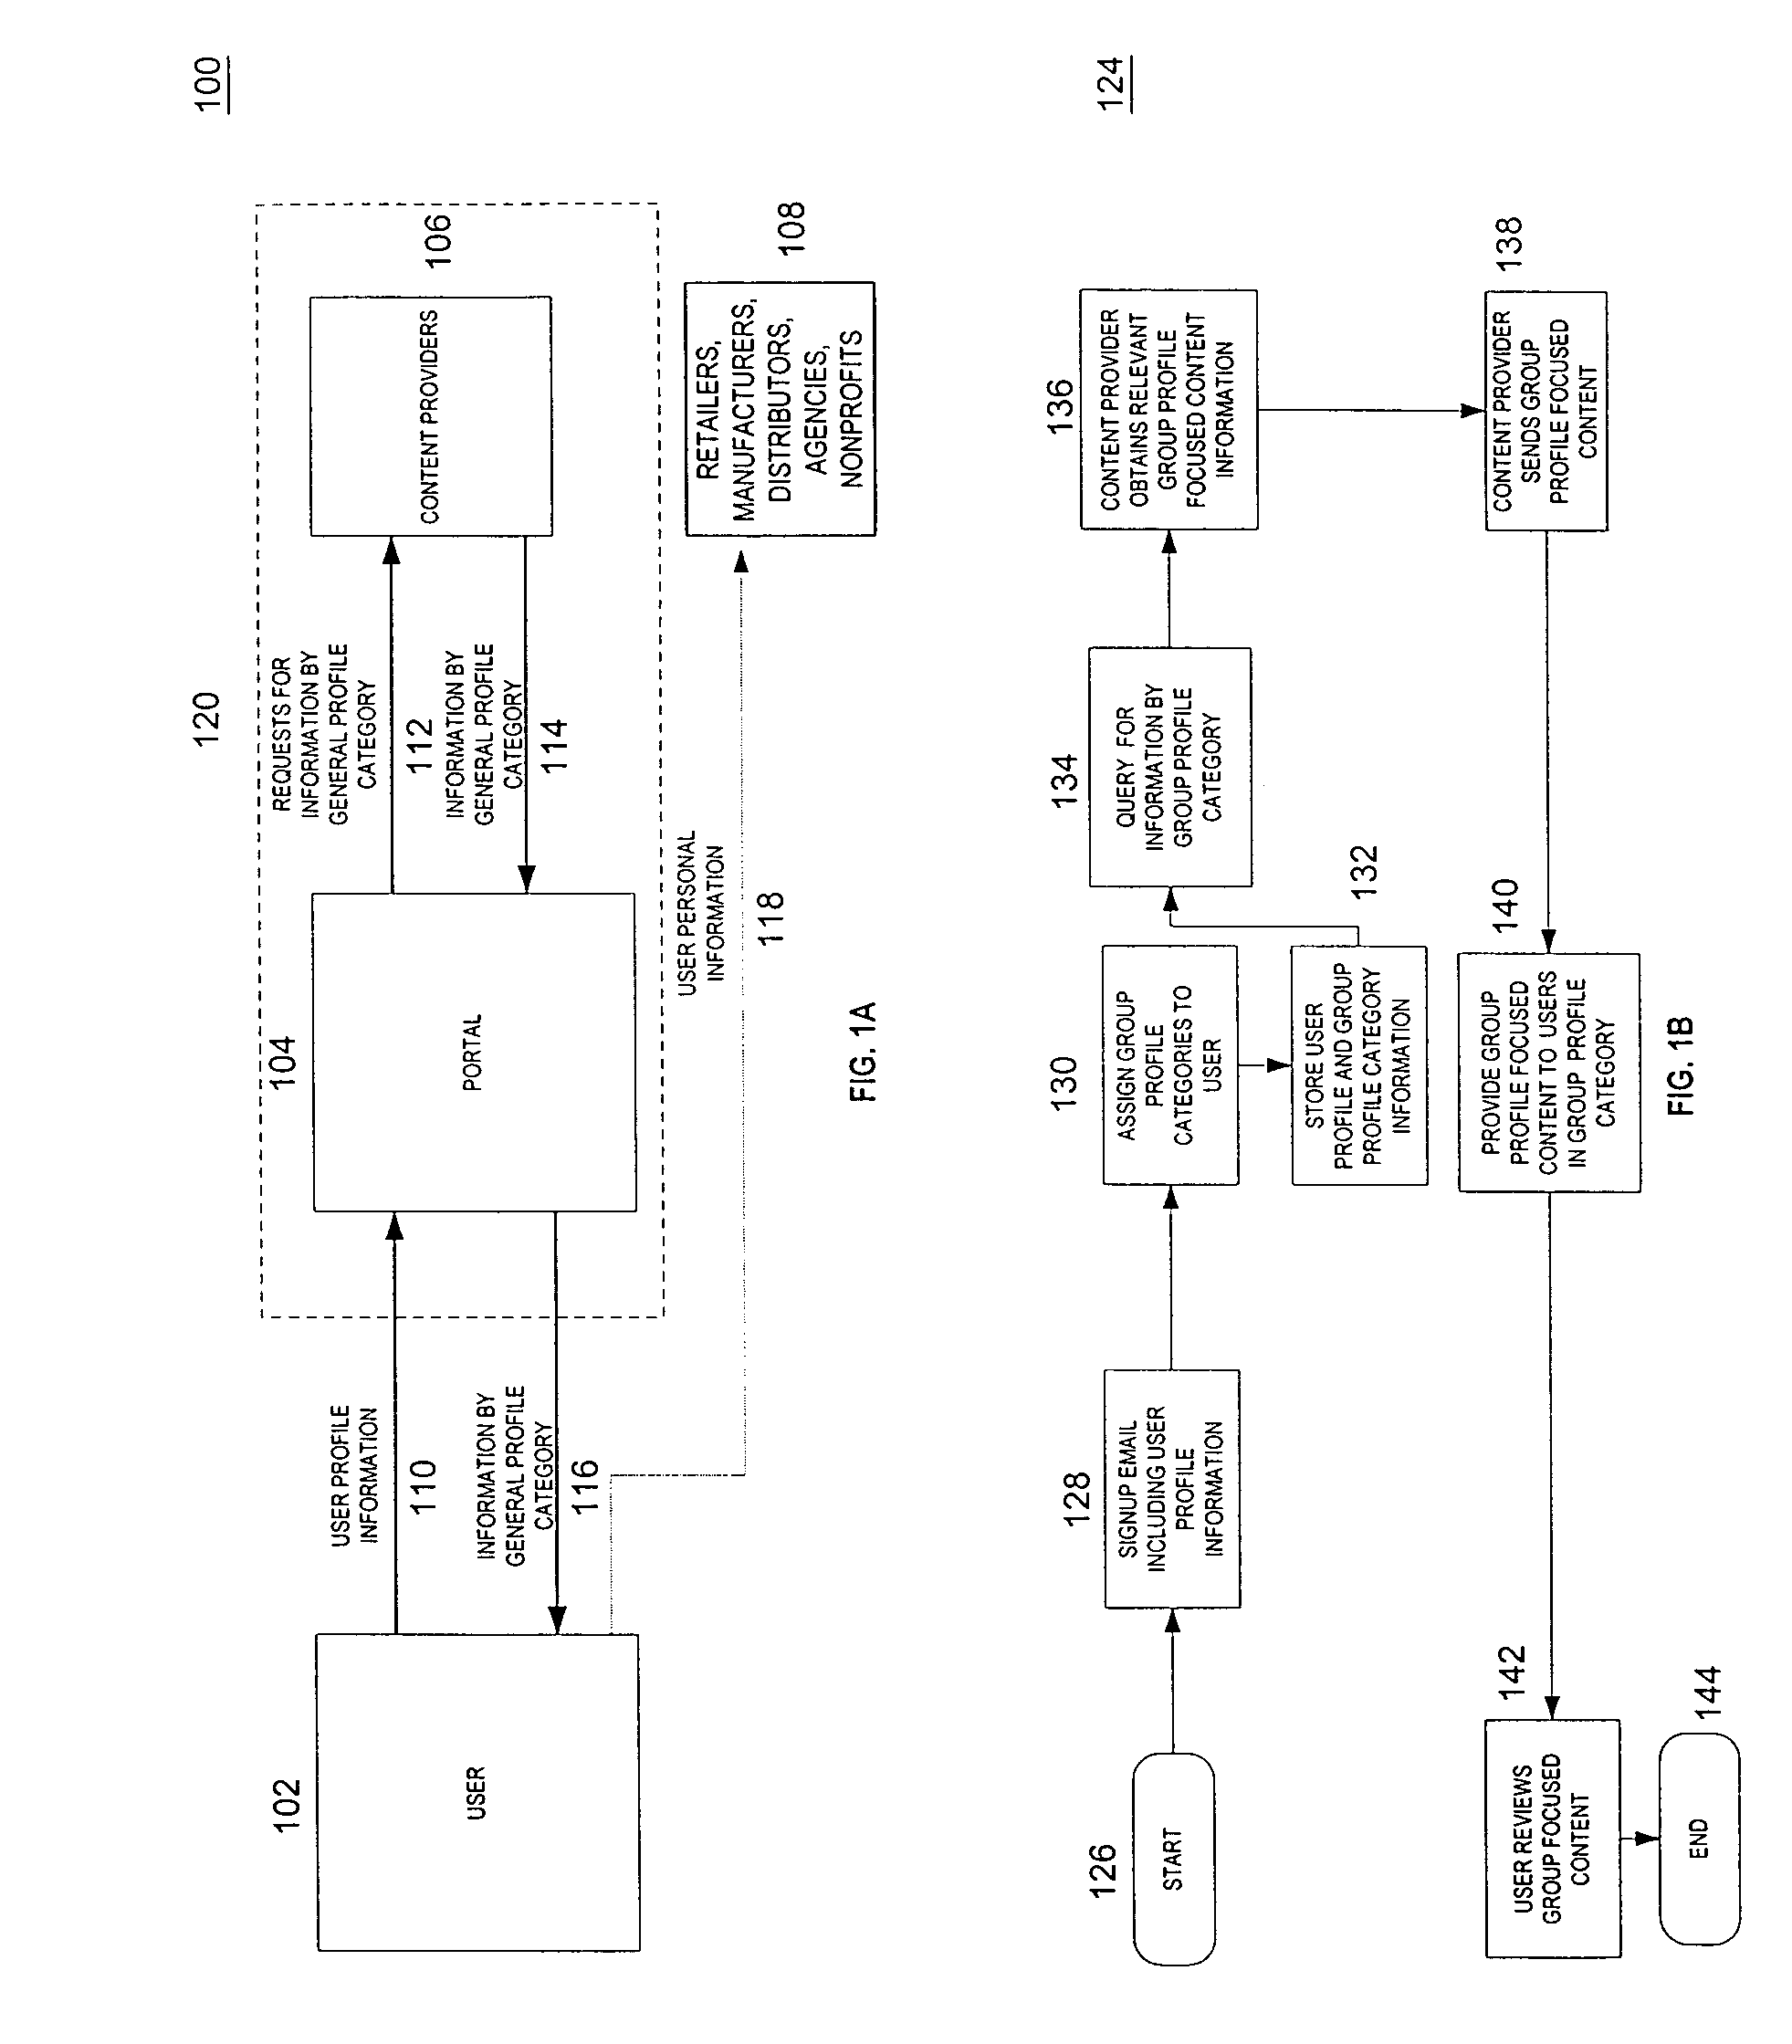 System, method and computer program product for gathering and delivering personalized user information